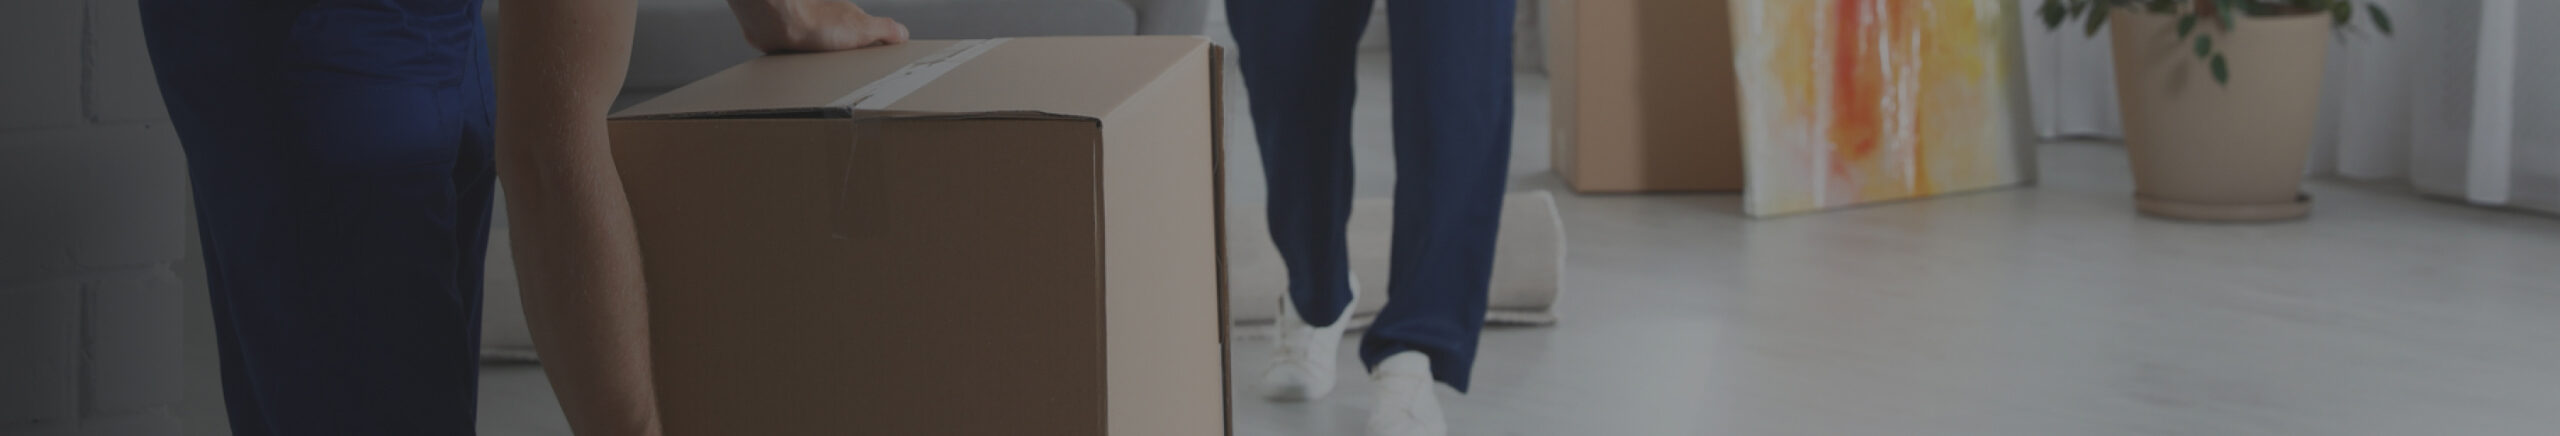 What should you do before moving into a new apartment?